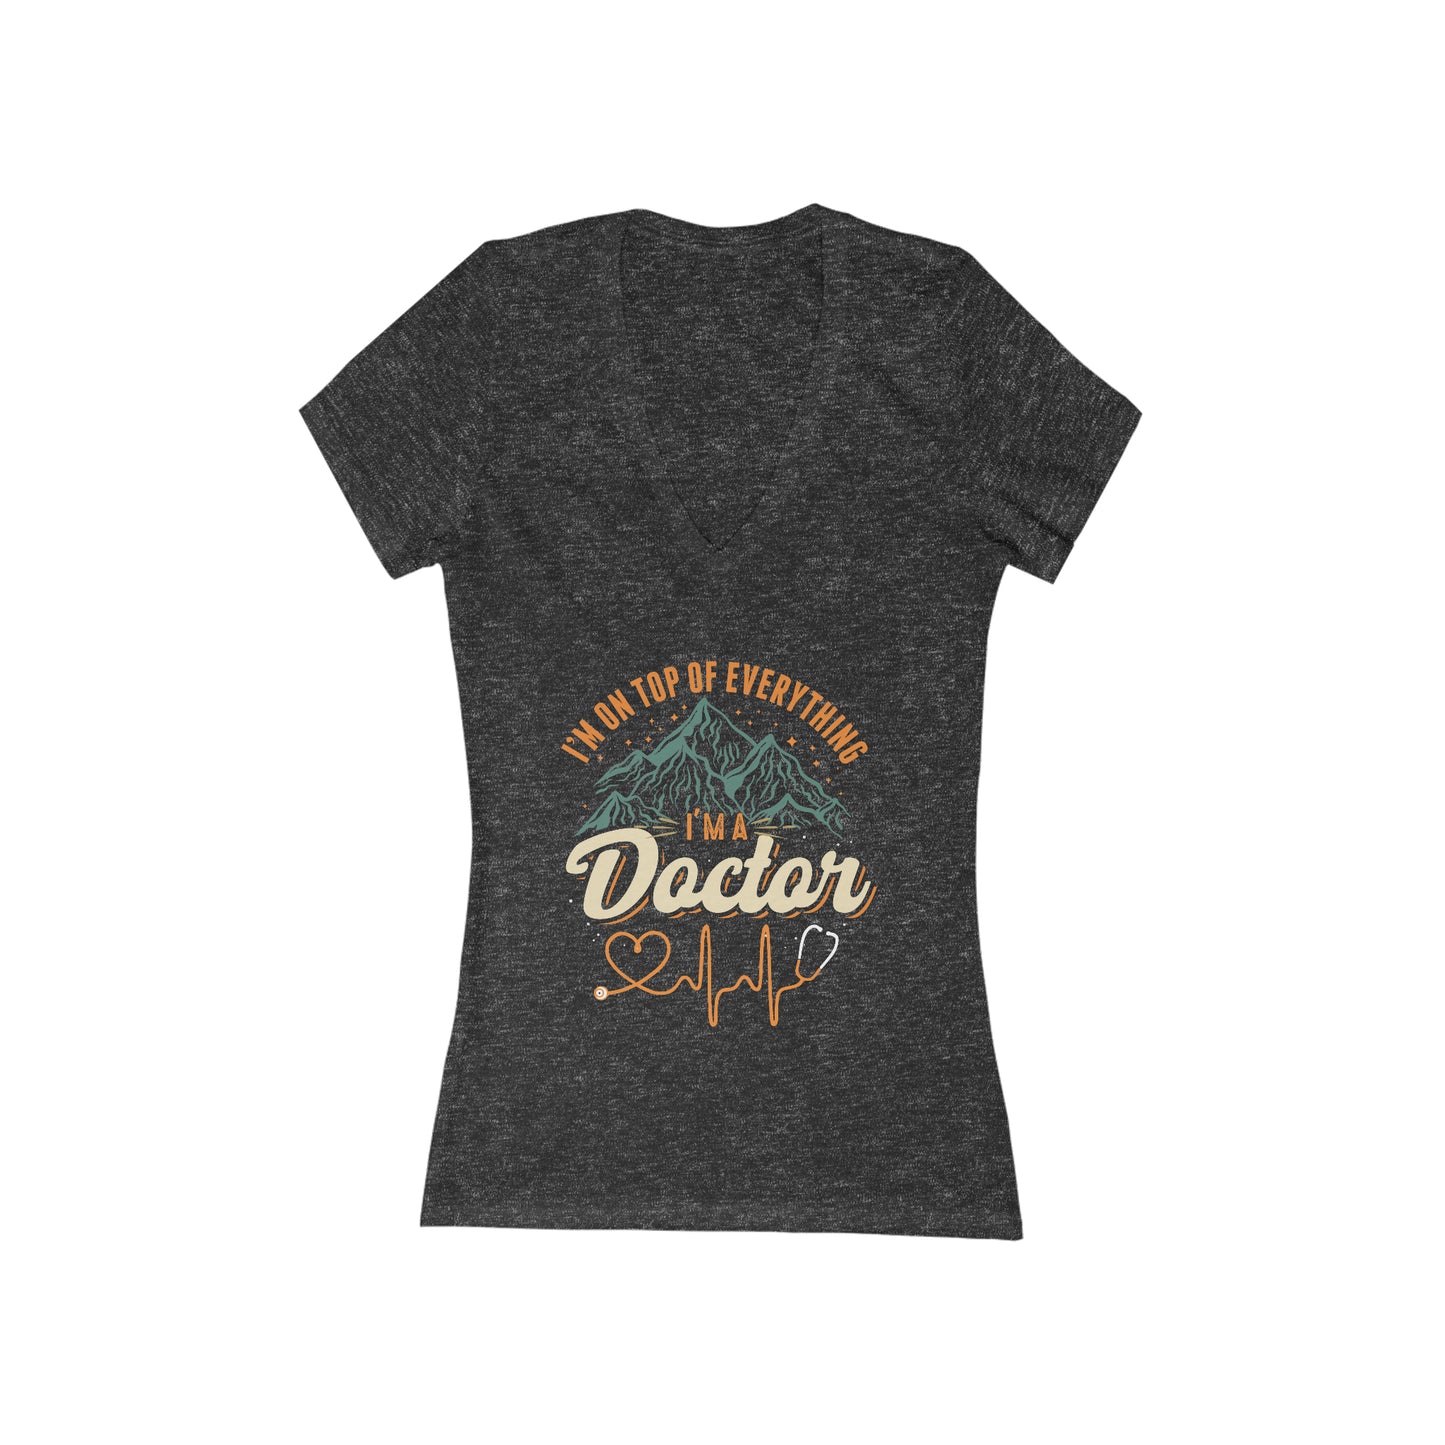 I'm on Top of Everything Women's Short Sleeve V-Neck Tee, Doctor shirts, Doctor gift ideas, gift for doctors, women shirt with doctor design